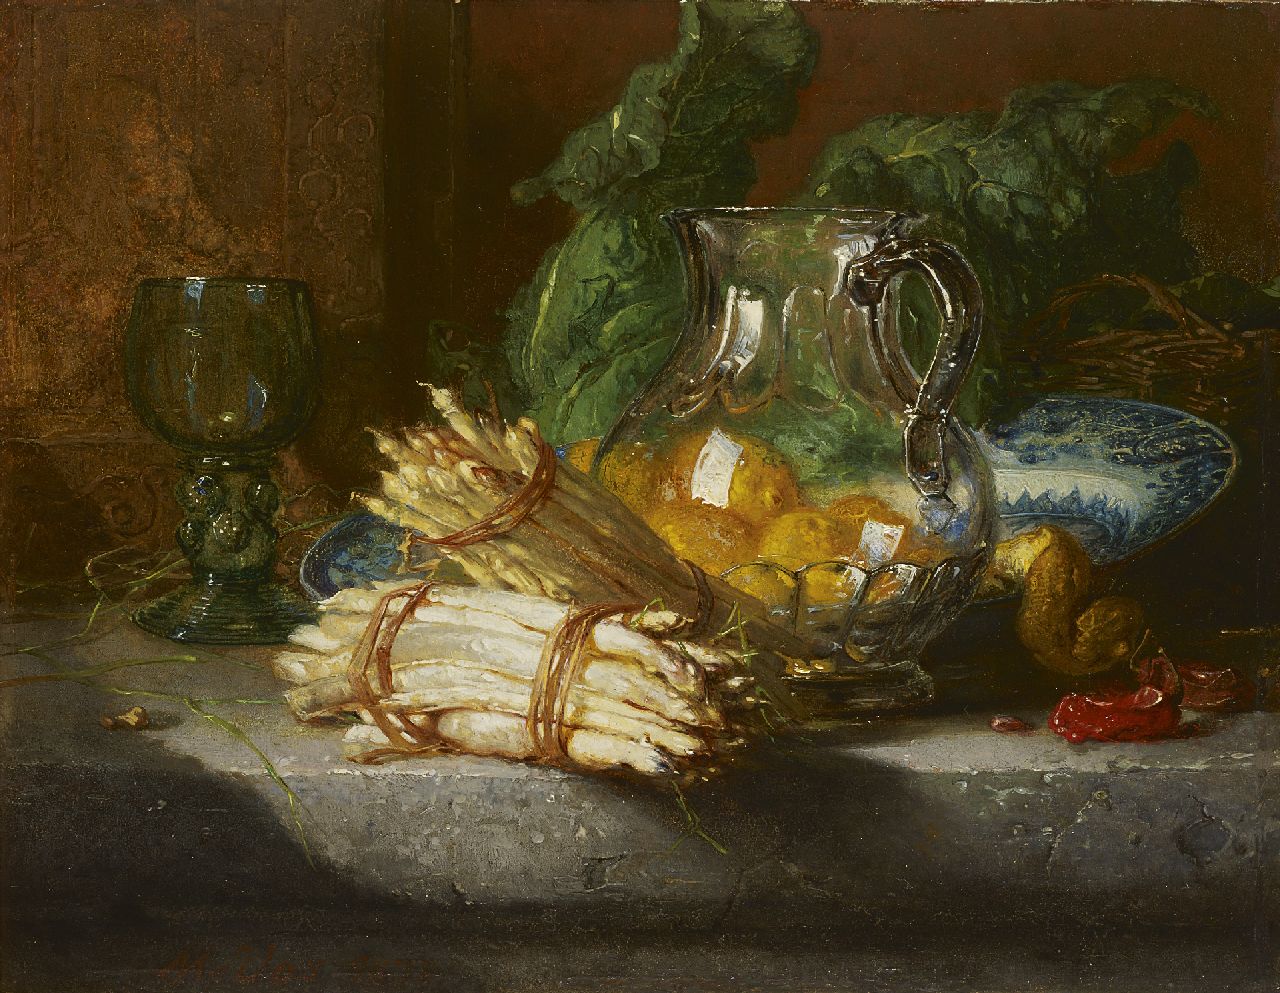 Vos M.  | Maria Vos, A still life with asparagus and lemons, oil on panel 24.6 x 32.1 cm, signed l.l. and reverse on label and painted 1877